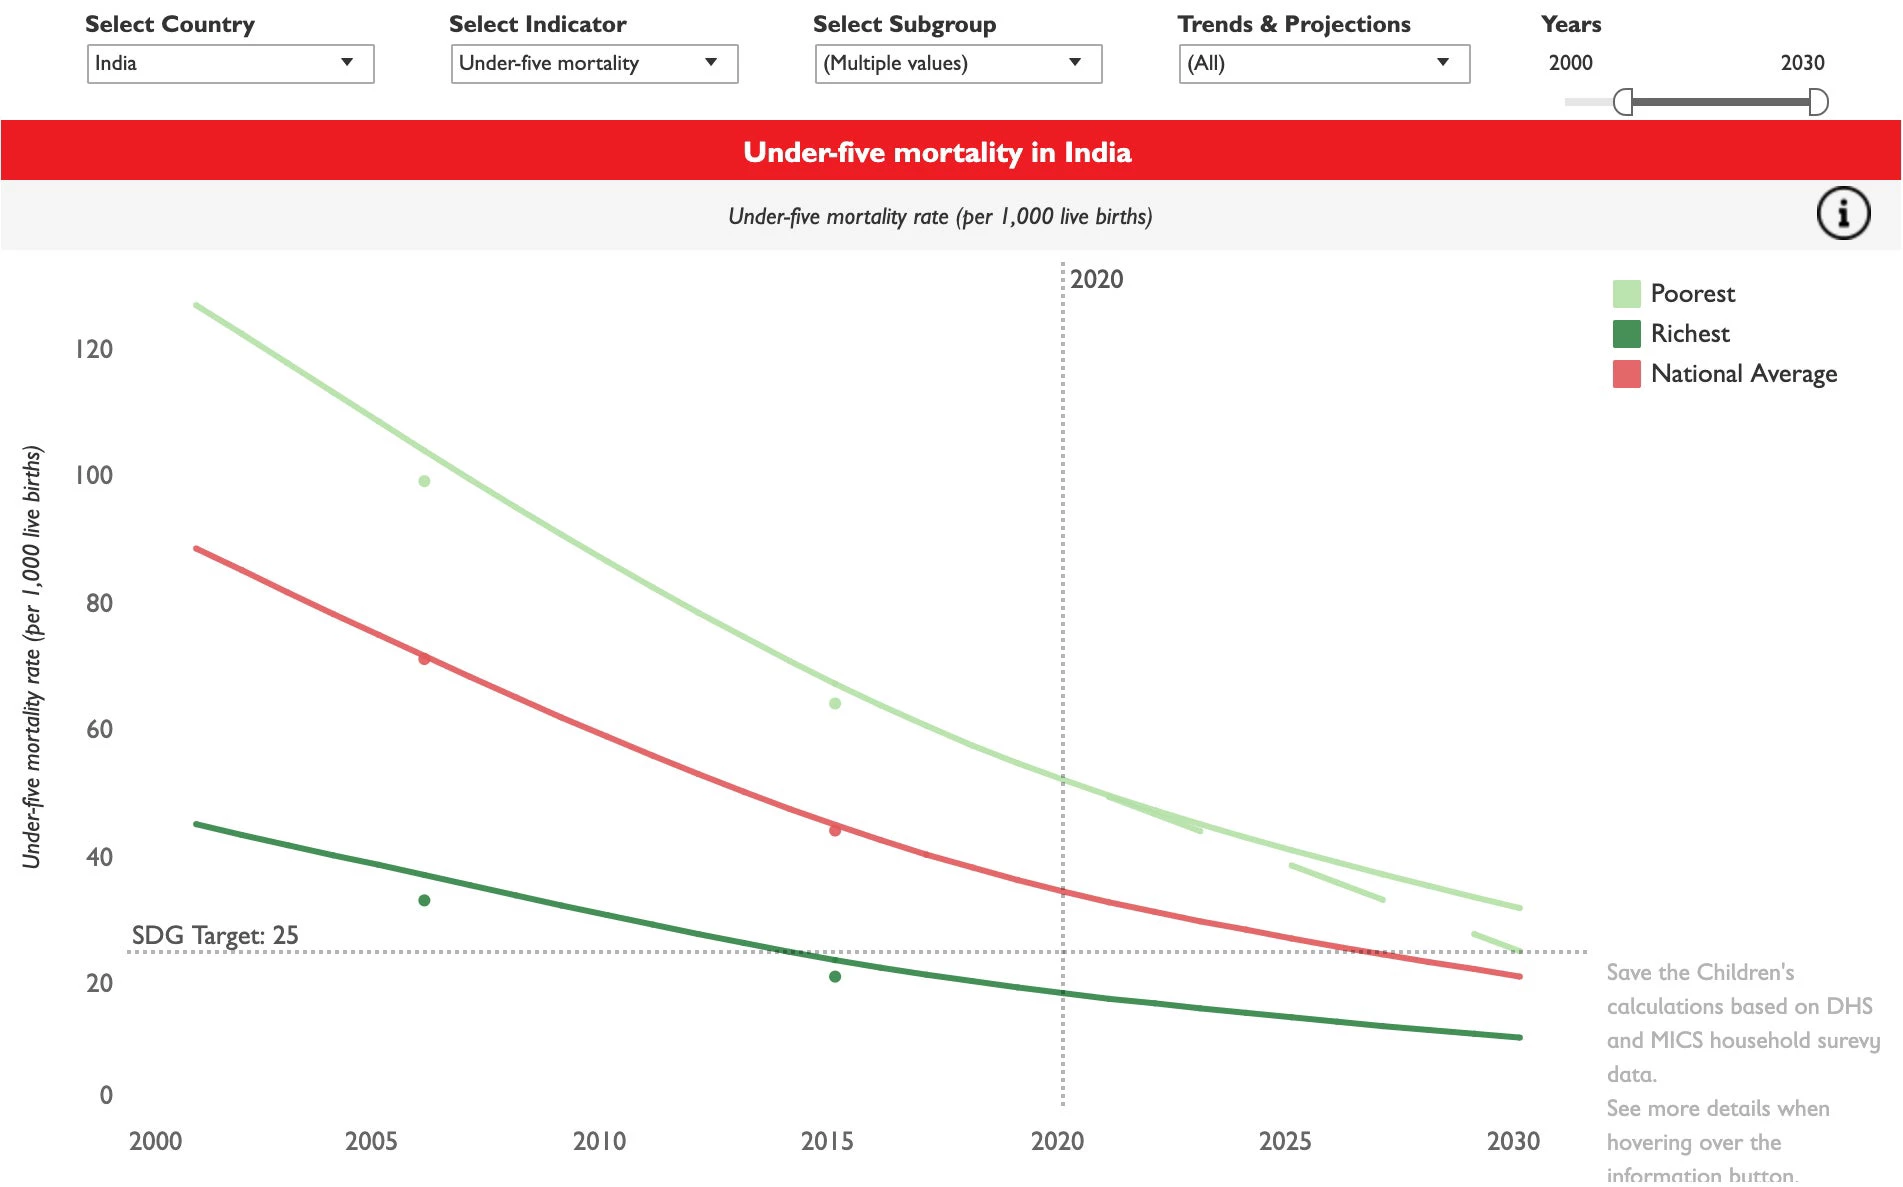 GRID Trends Projection - Under-5 mortality in India